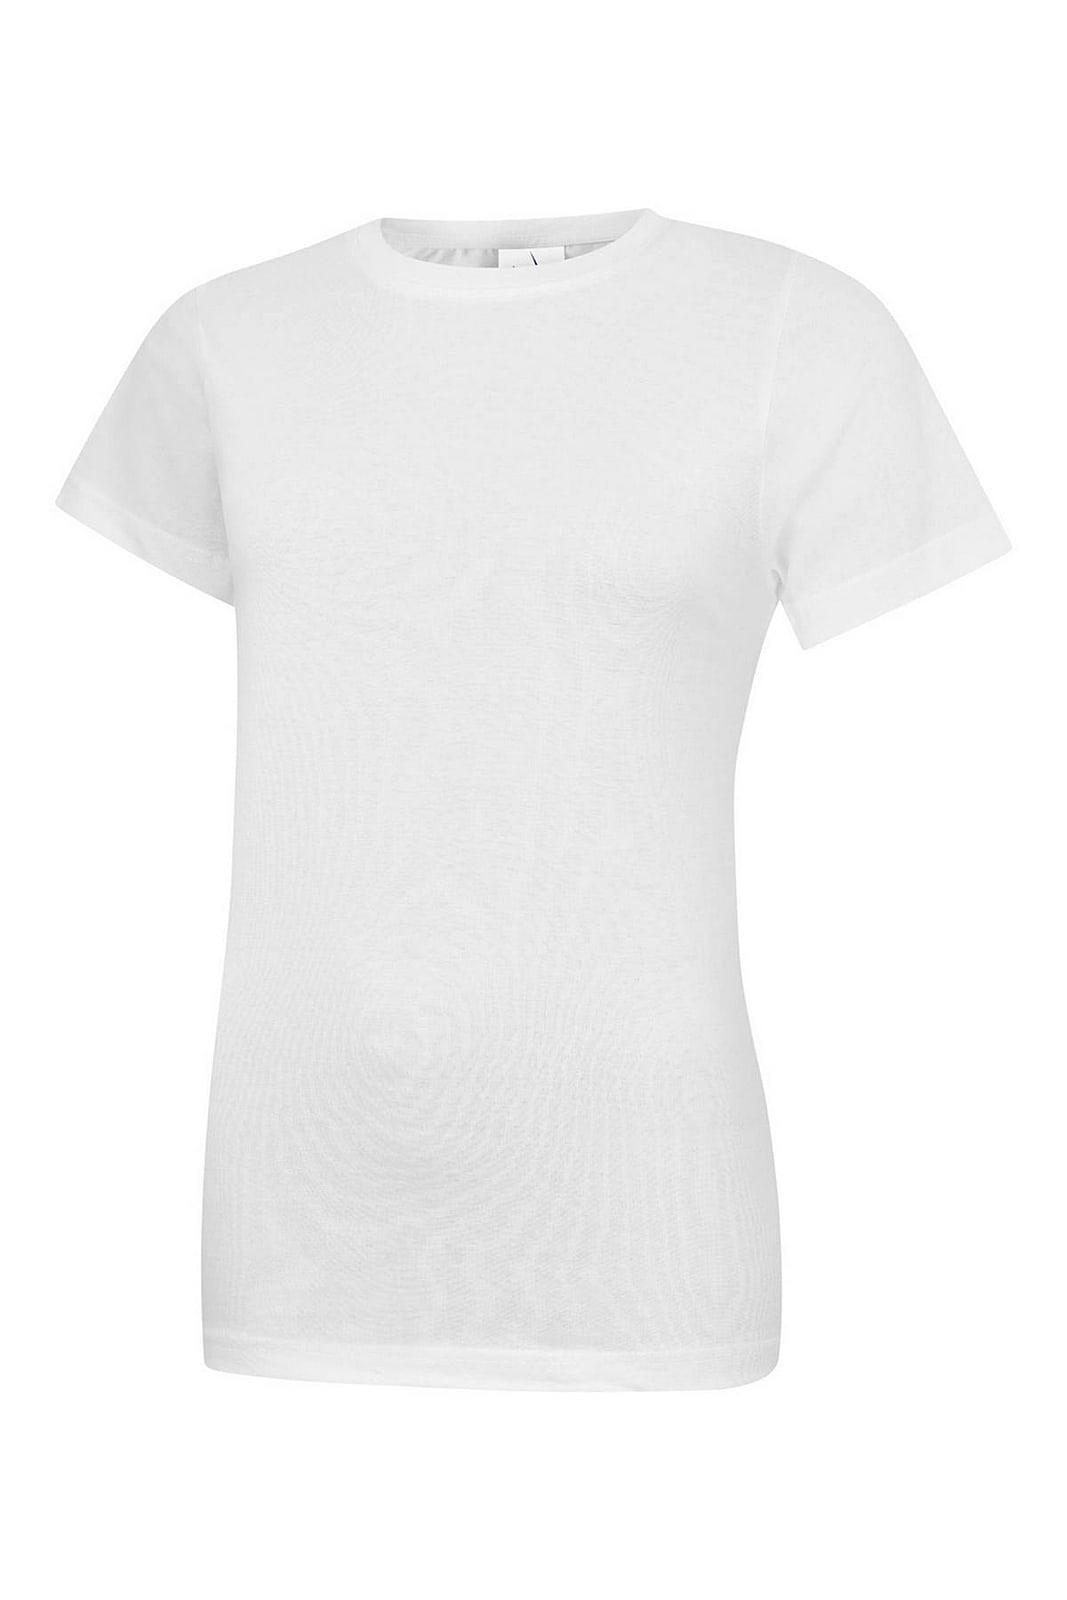 Uneek Womens Classic Crew Neck T-Shirt in White (Product Code: UC318)